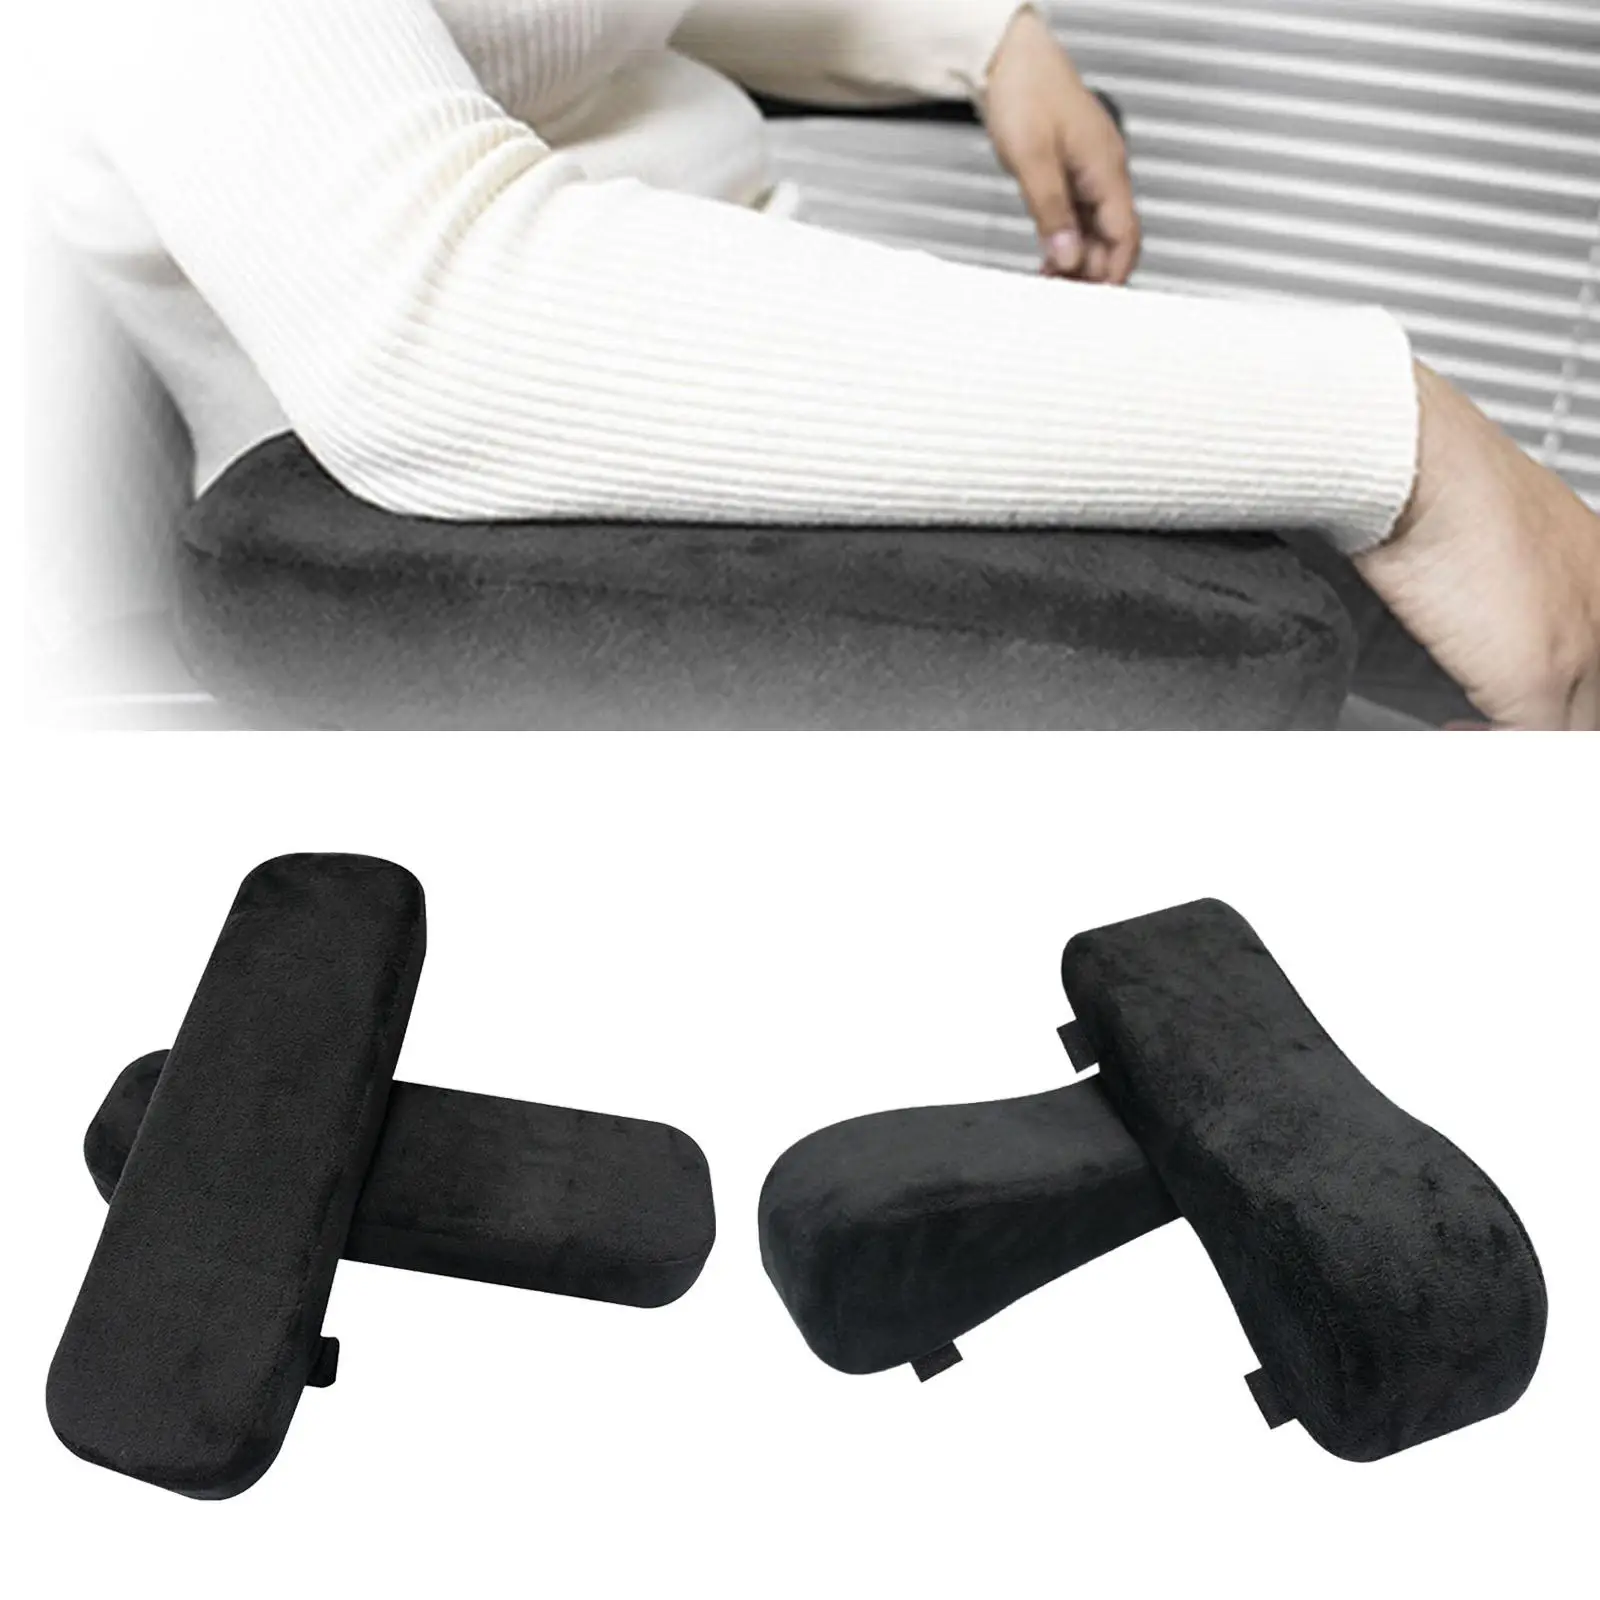 2 Pack Armrest Pads Removable Universal Memory Foam Armrests Easy to Attach Soft Arm Rest Cover Chair Gaming Chair